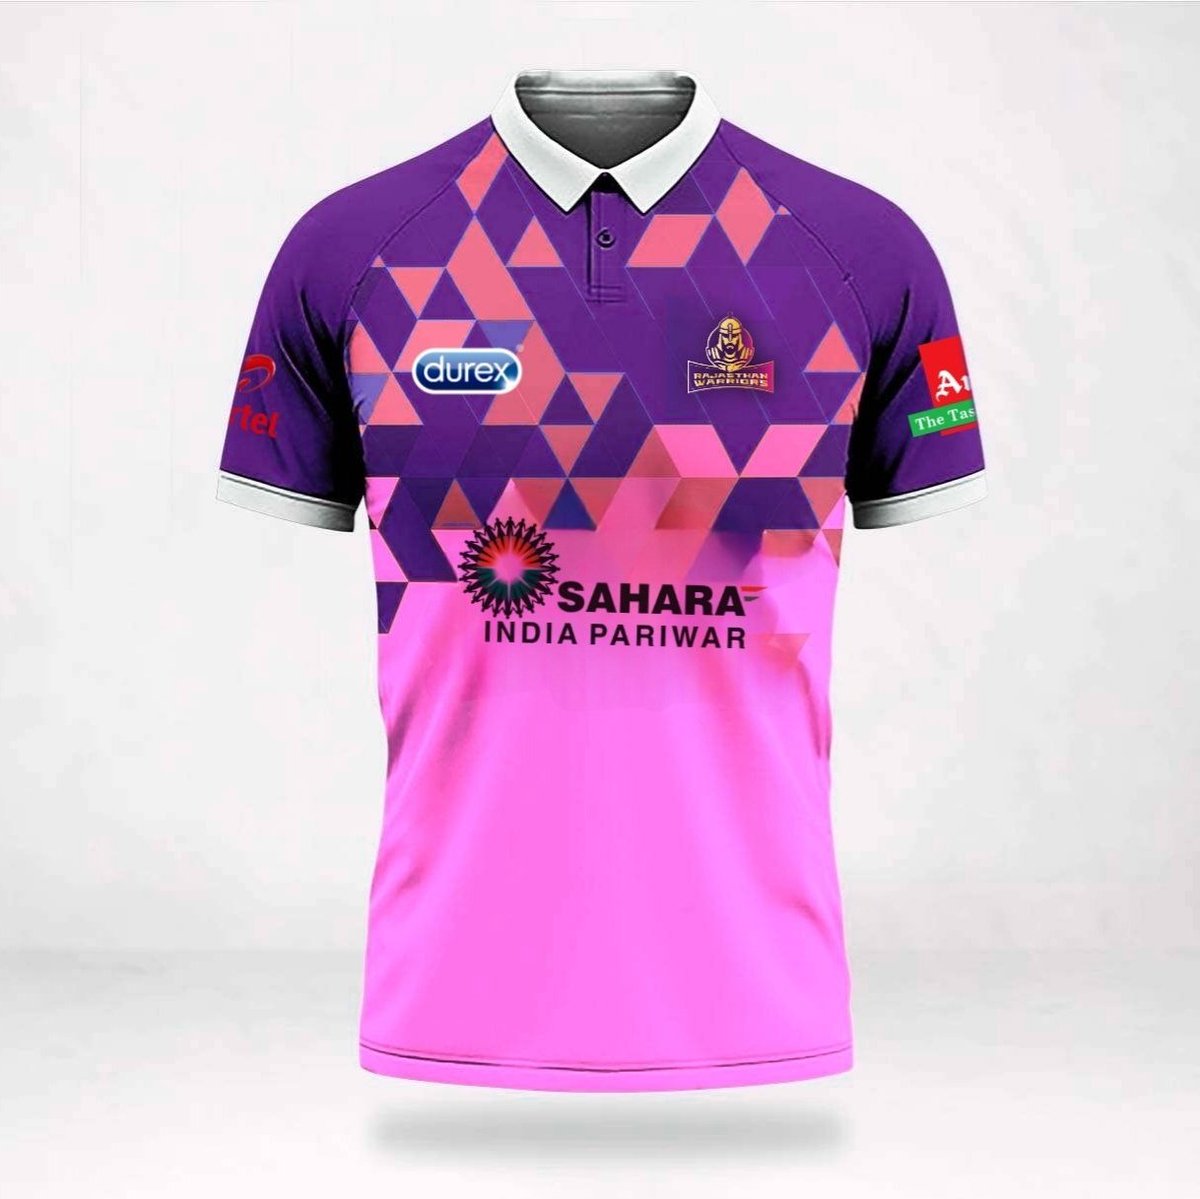 Revealing our New Jersey for the spl 6

Thanks to our sponsor partner amul sahara
And Durex 
#Spl6
#Weareroyals